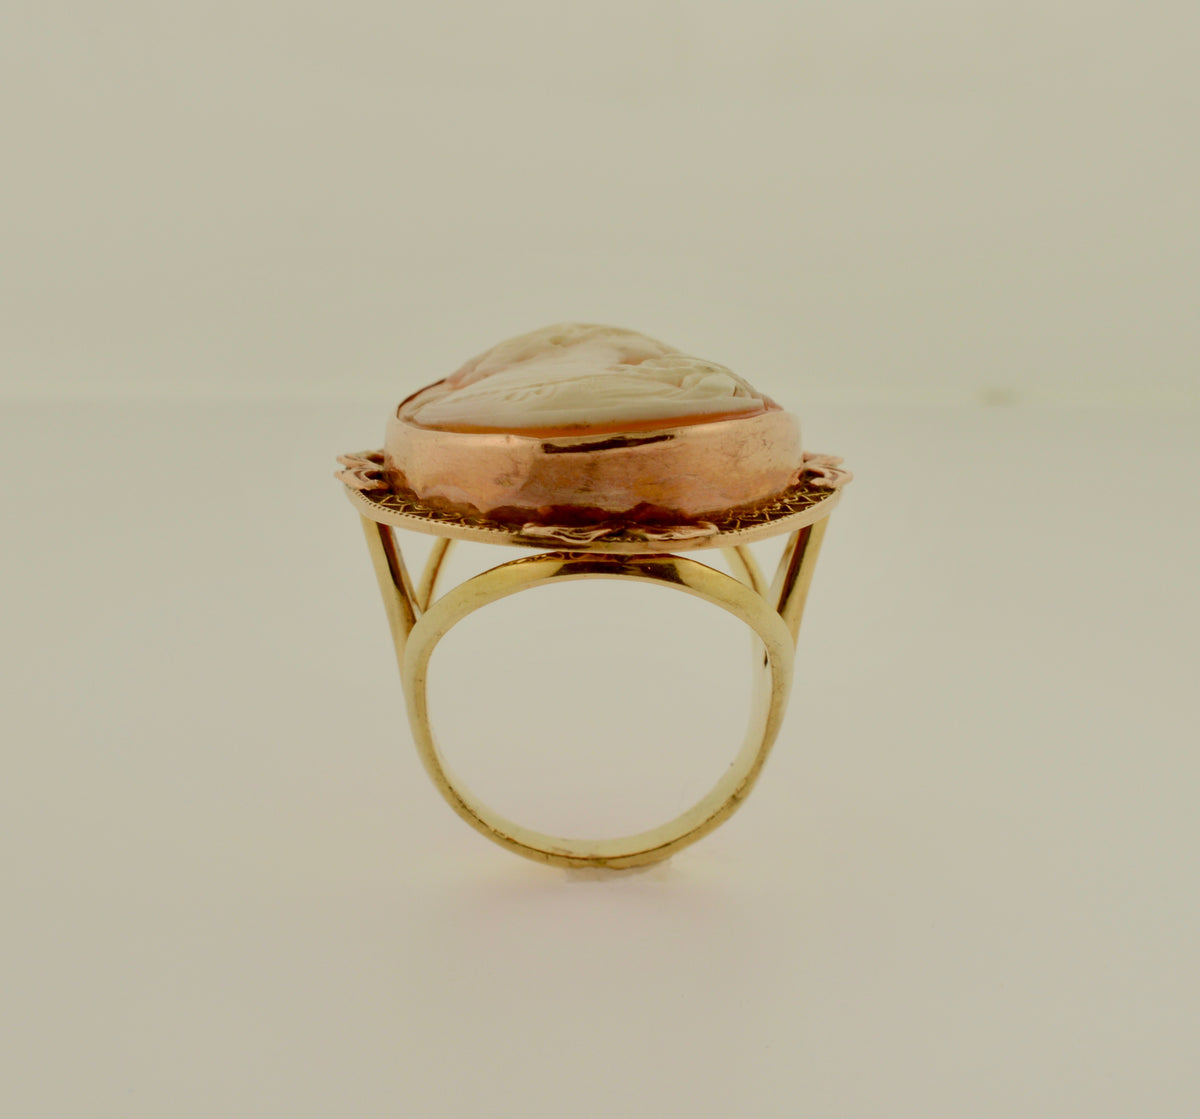 14K Yellow and Rose Gold Large Oval Shell Cameo Ring